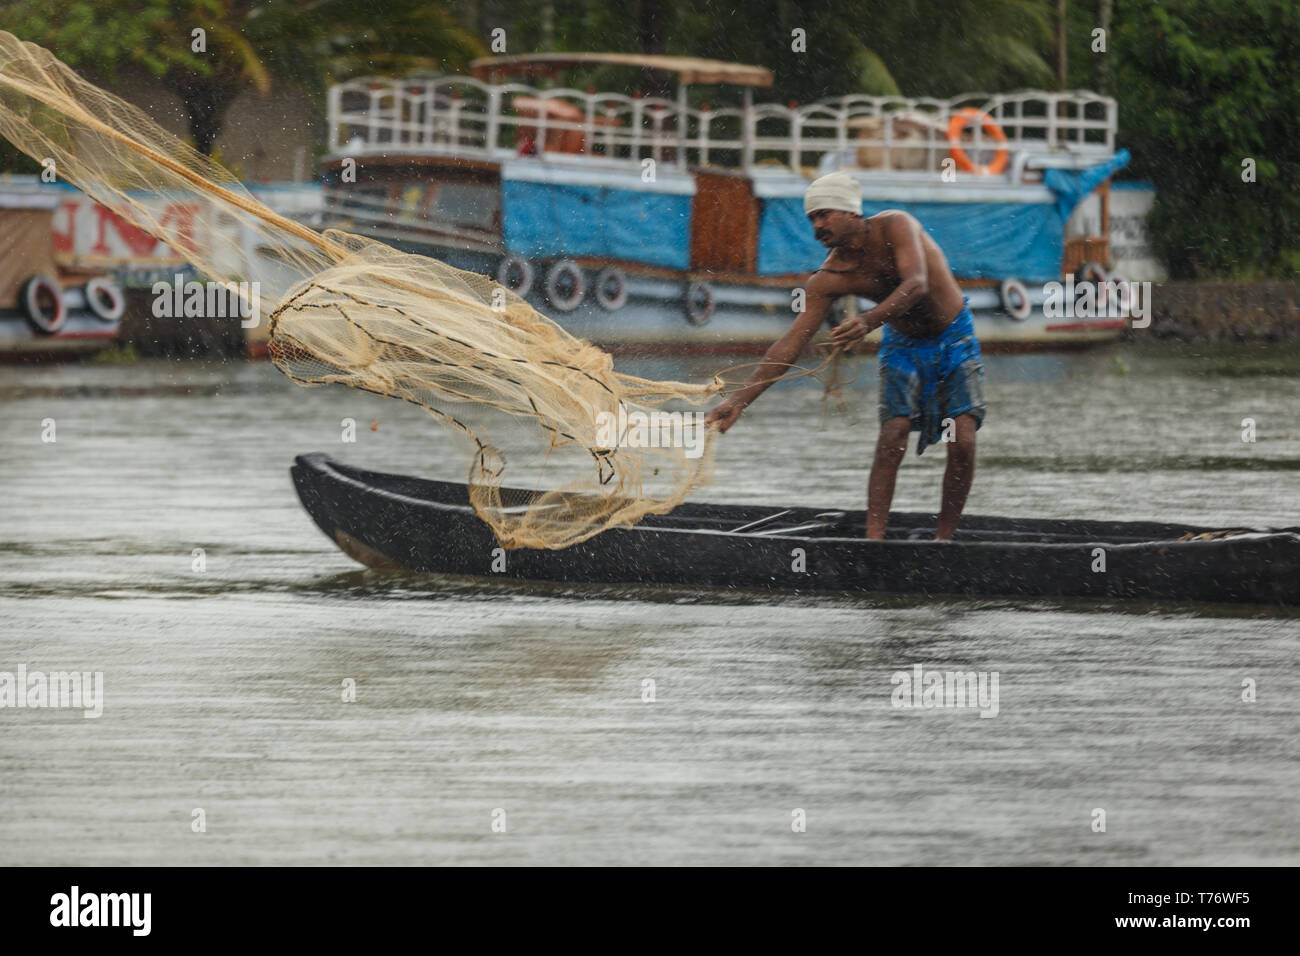 Man stands on long dugout canoe in shallows of jungle river casting out a fishing net with native house boat in background Stock Photo